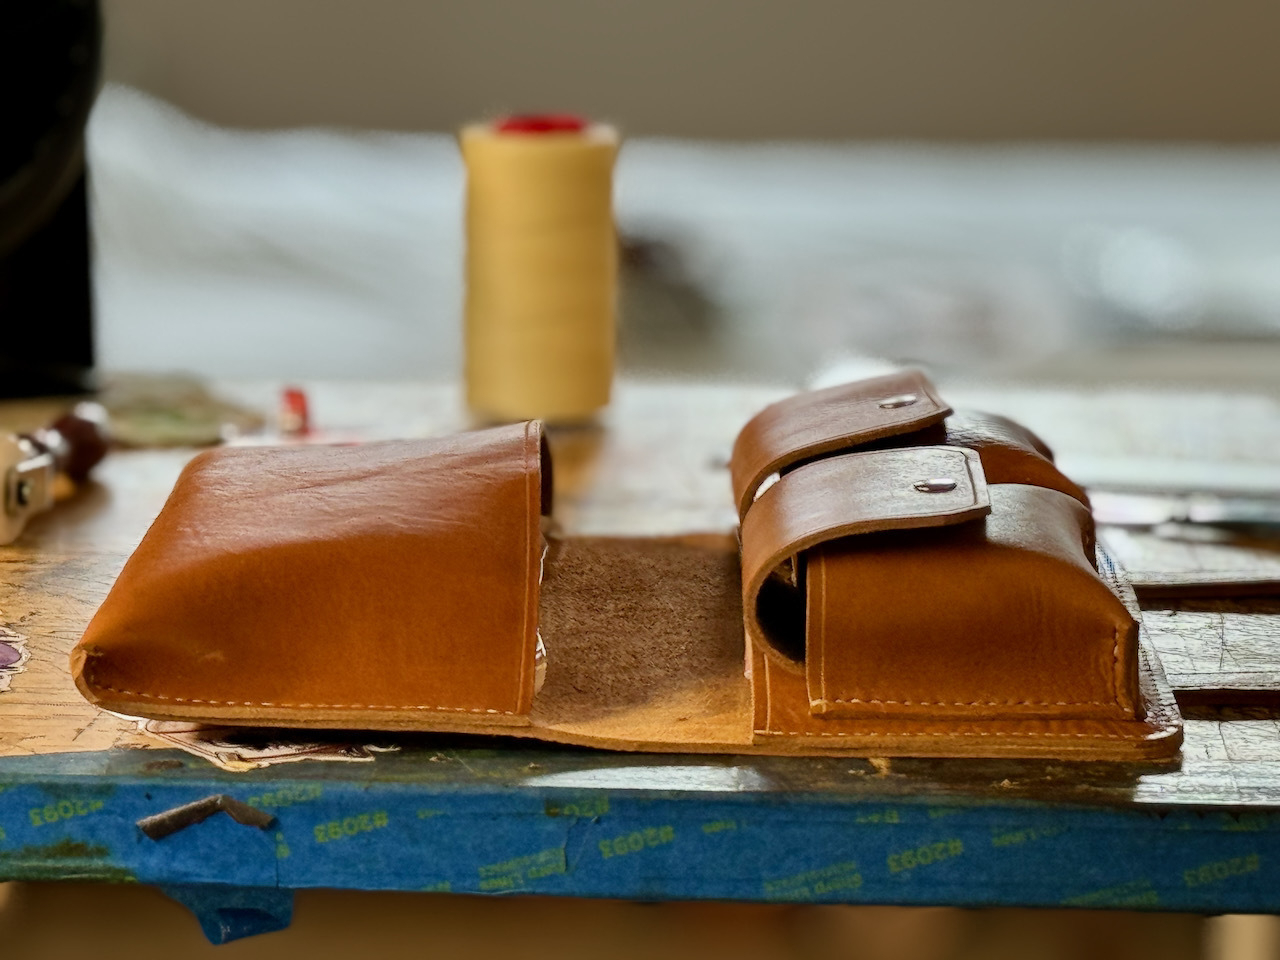 Image showing leather cigar case flapped open, perspective is to show the height of each pocket which is about 1 inch when in use.